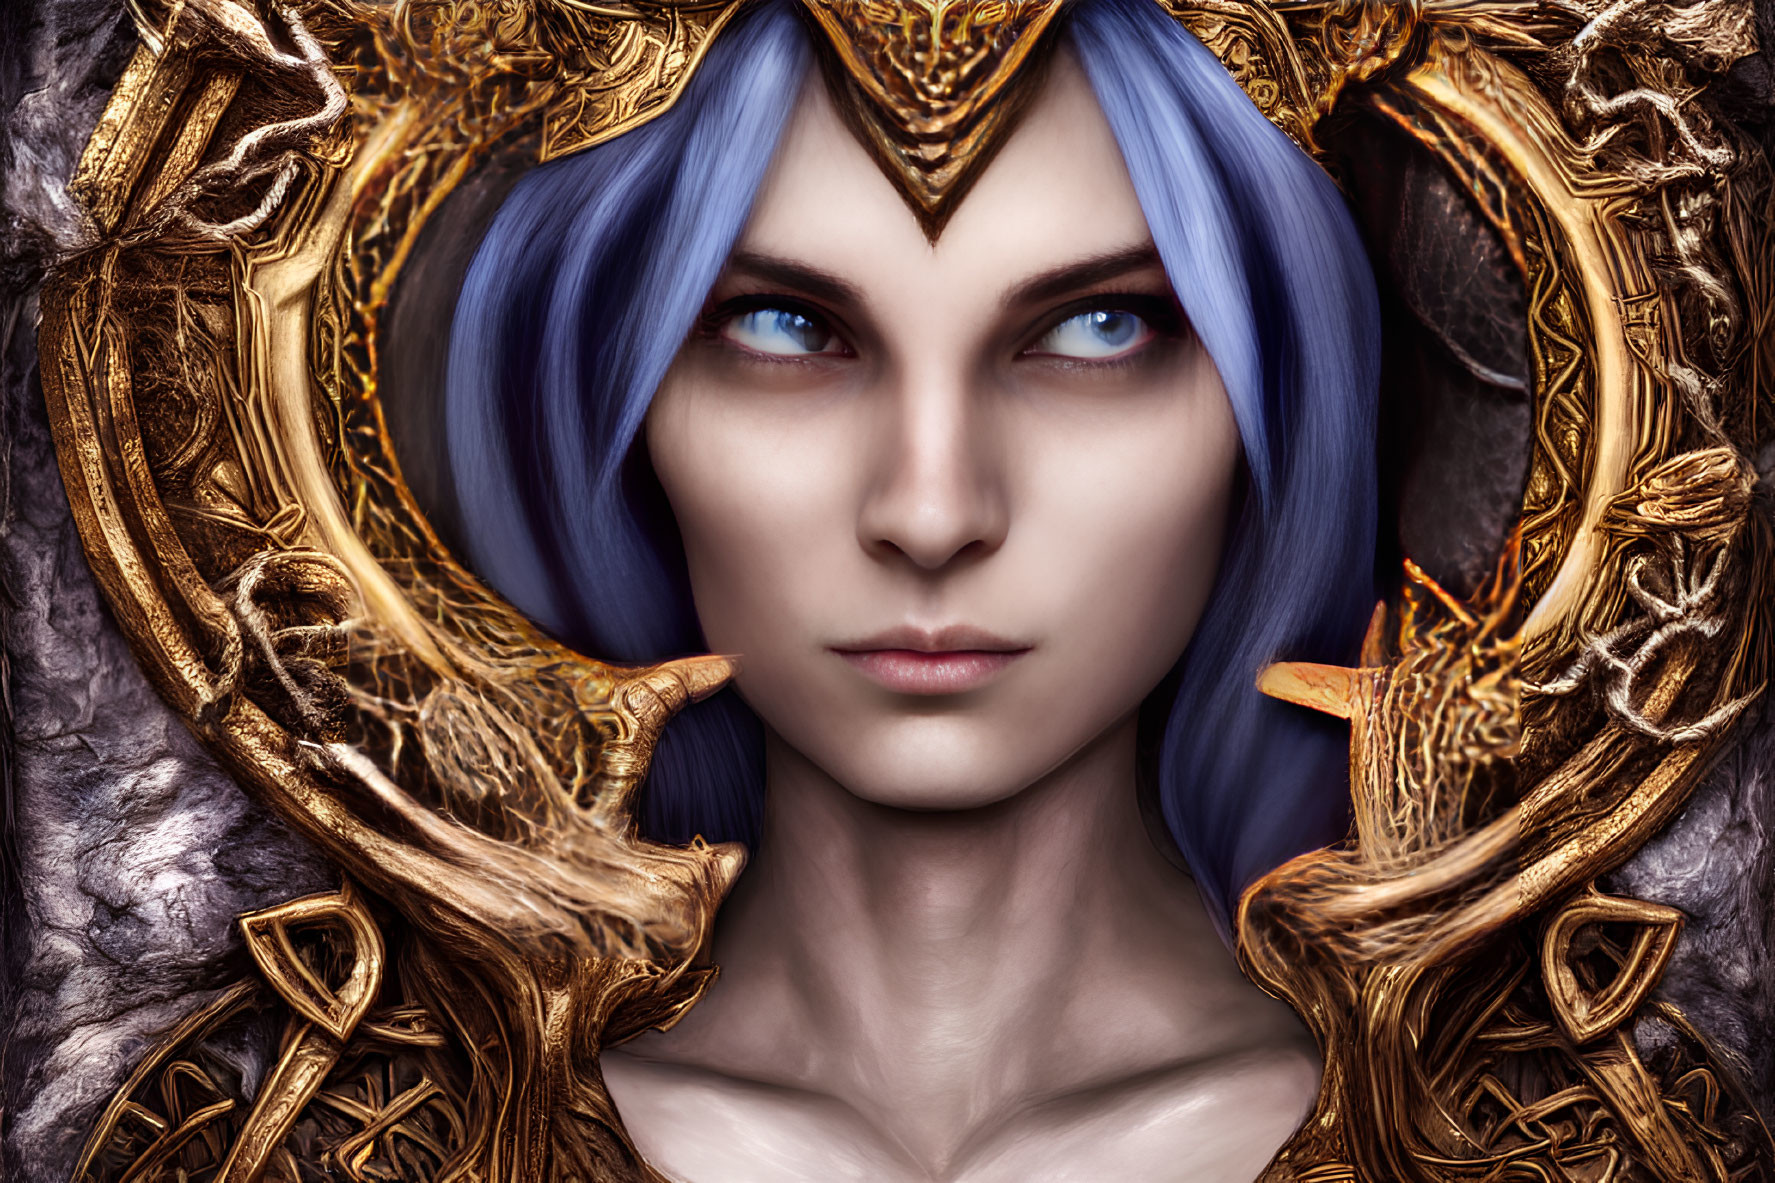 Fantasy character with blue hair and blue eyes in ornate golden frame